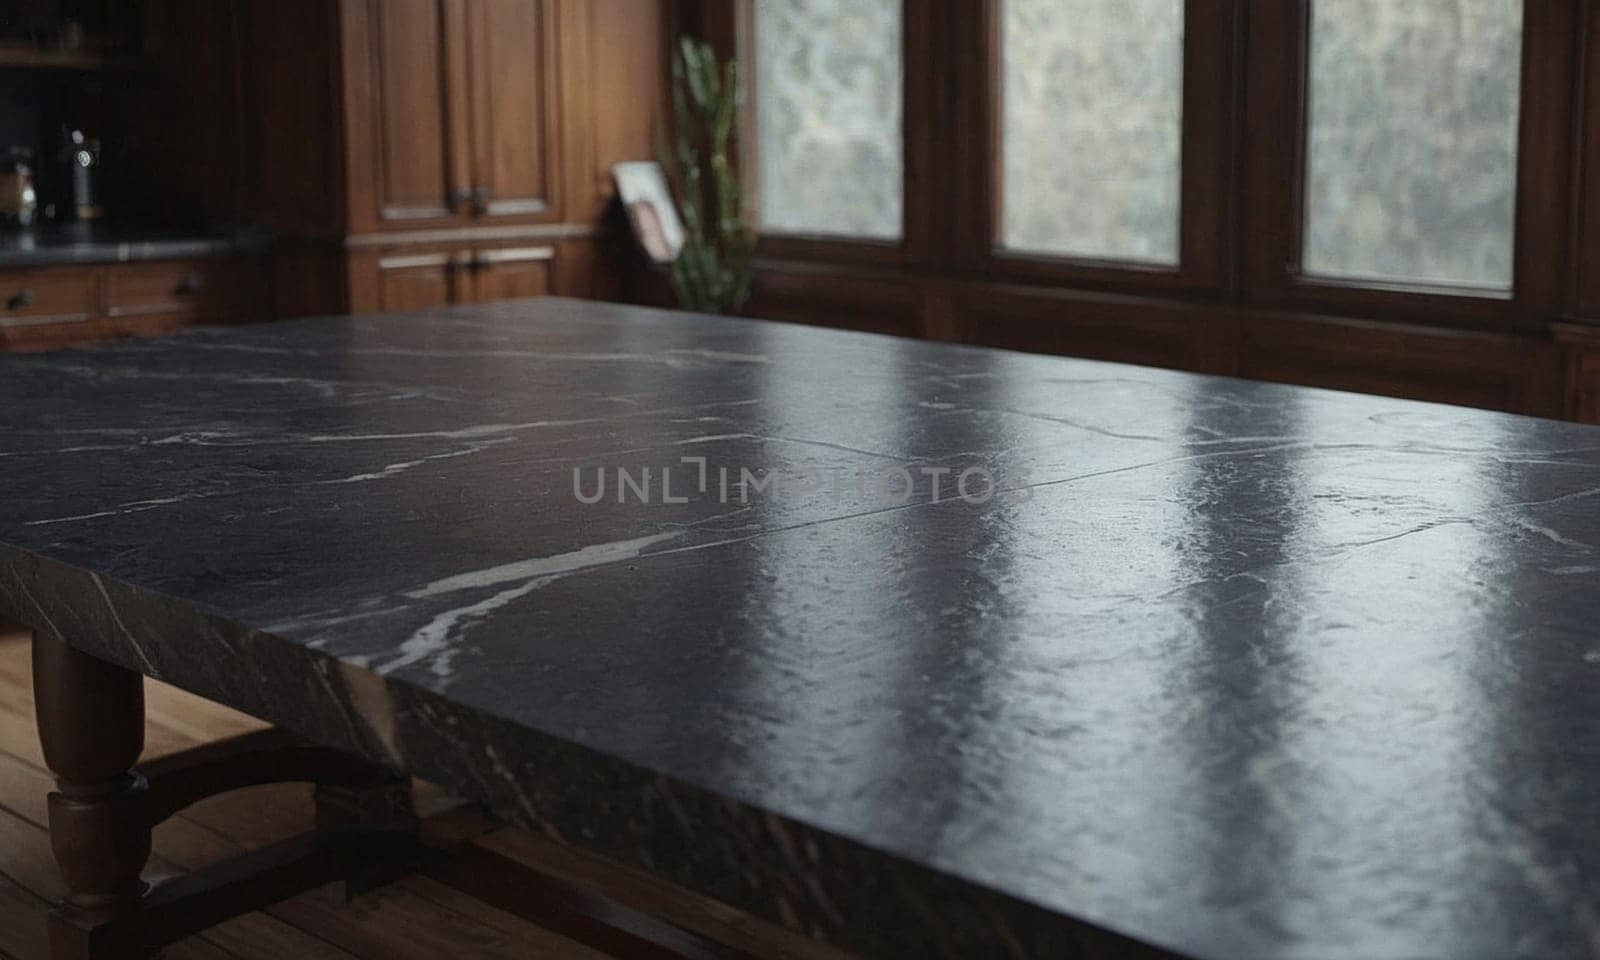 Professional design background with expensive black granite. Dark stone table with elements. High quality illustration